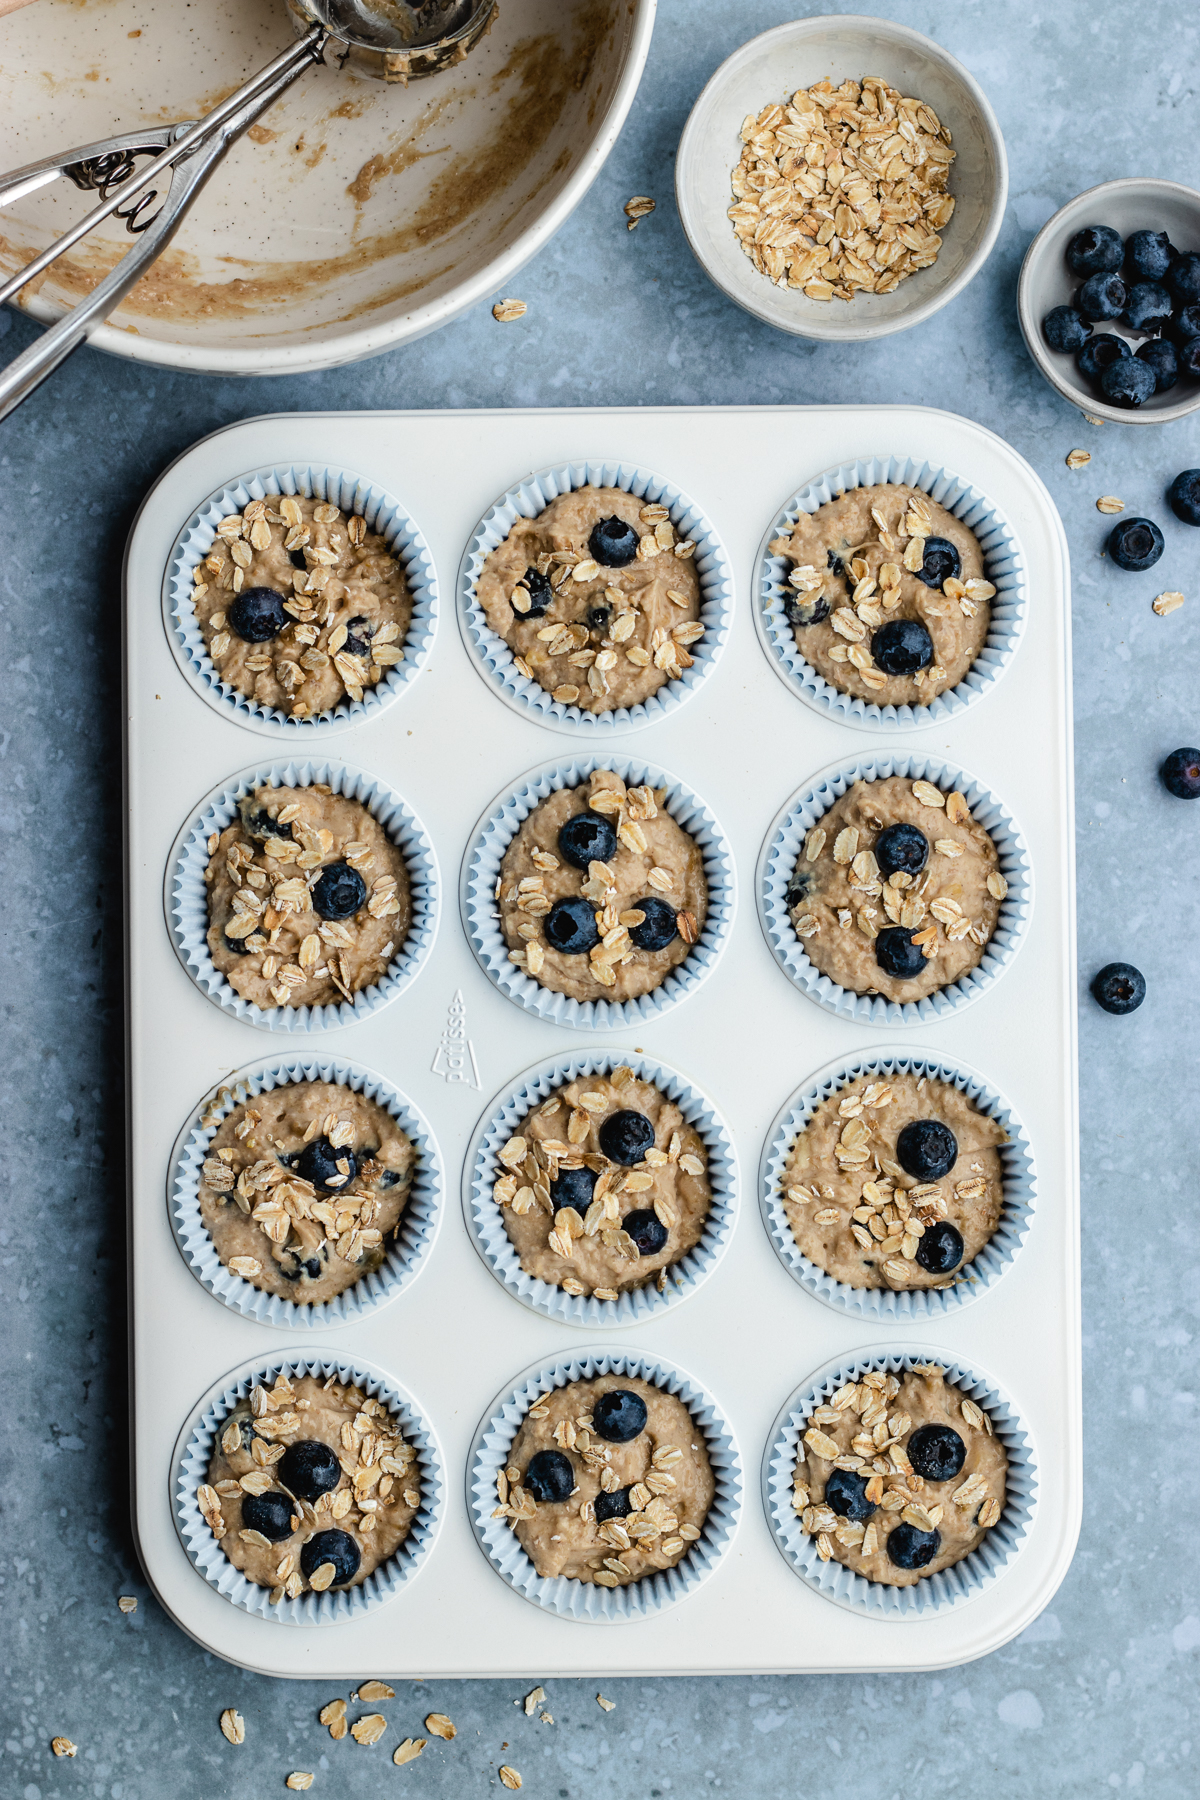 Banana blueberry oatmeal muffins ready for the oven.